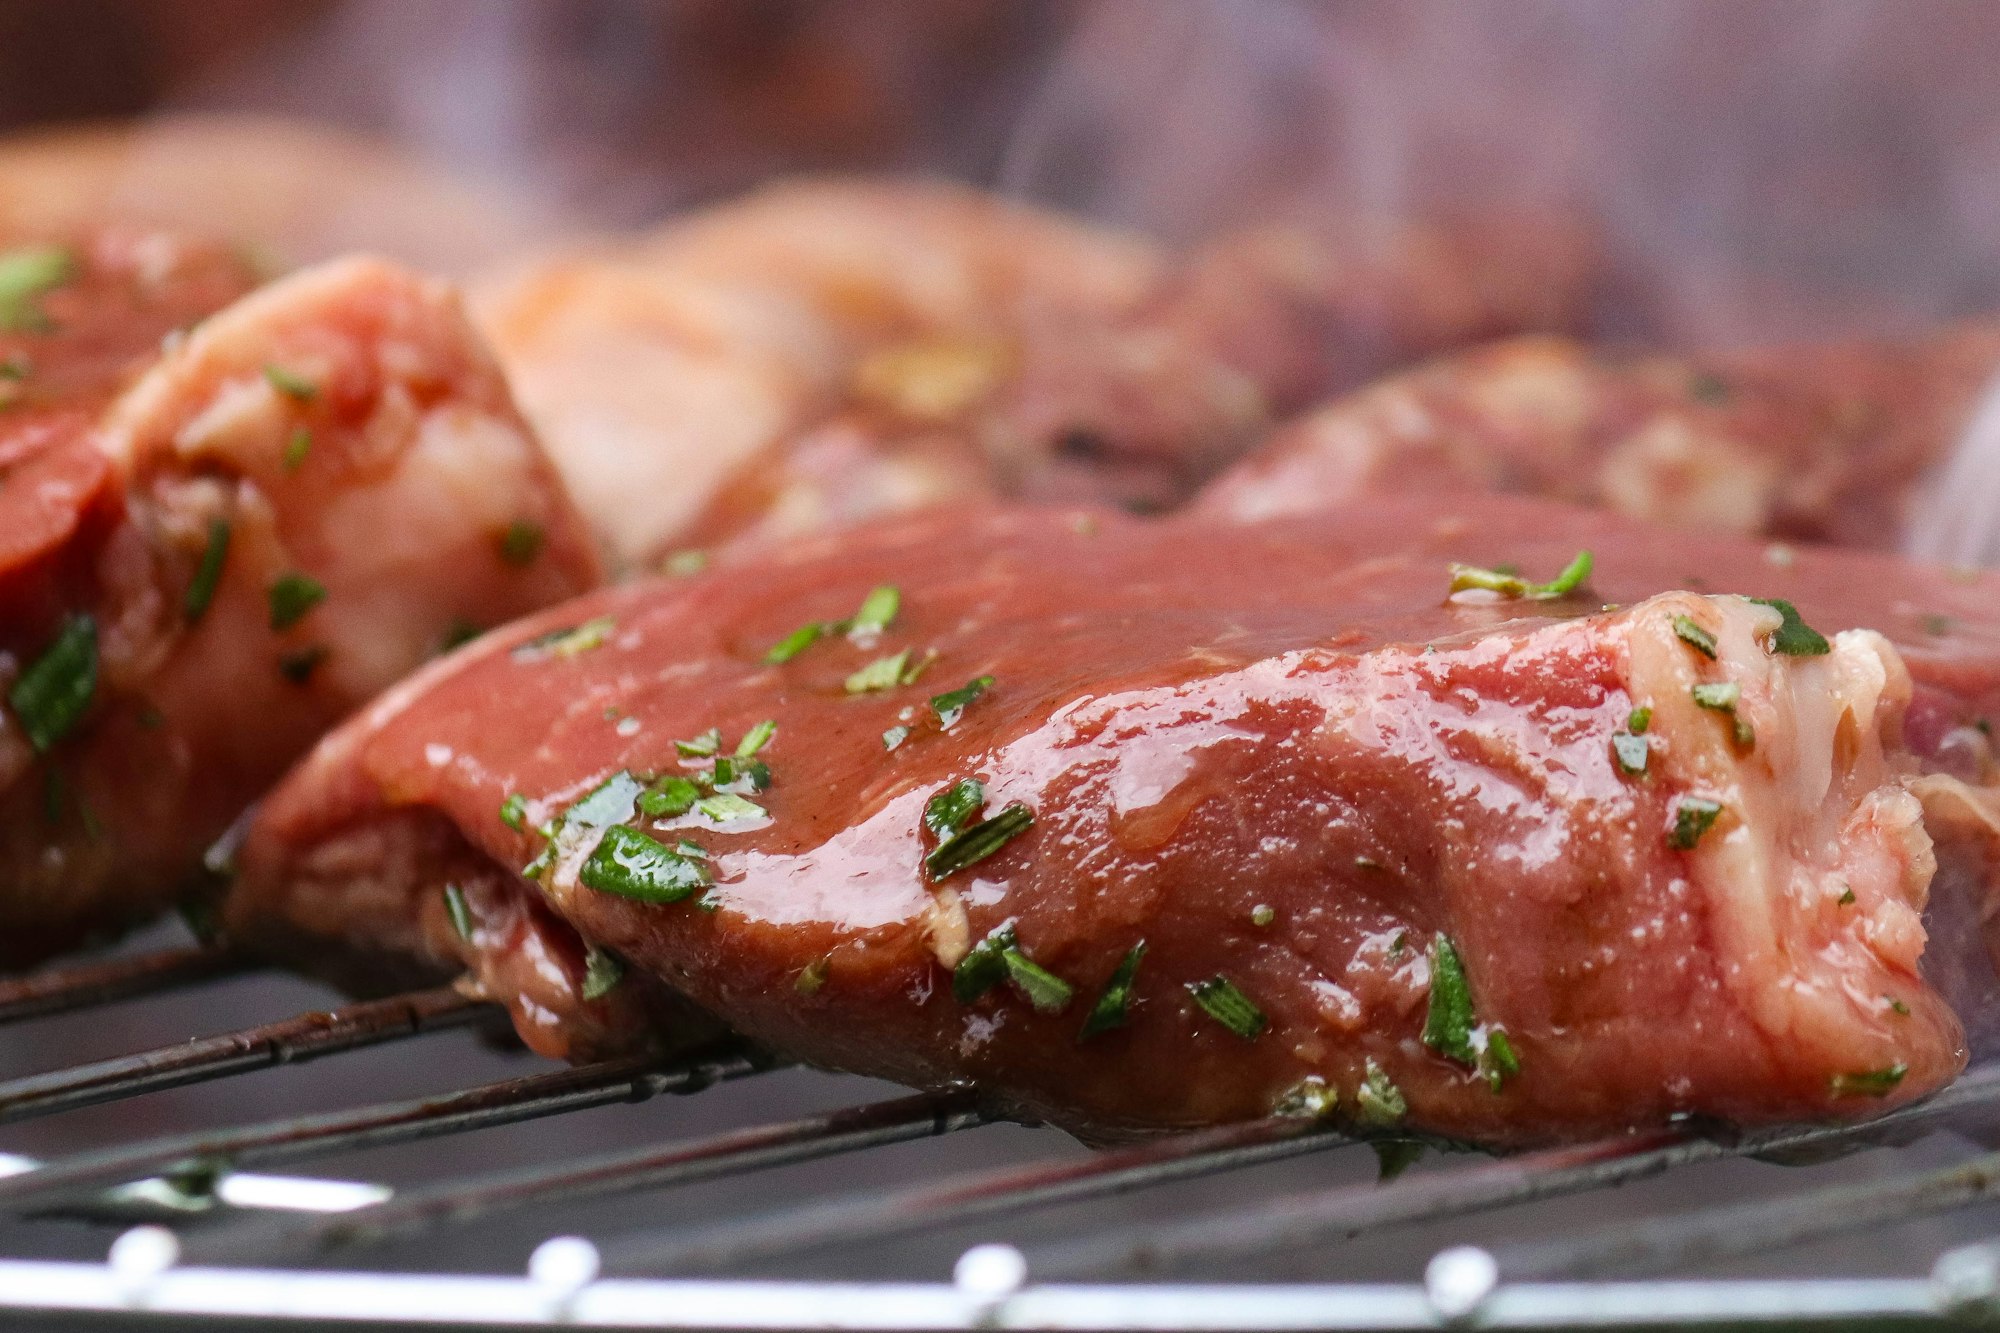 A juicy raw rump steak cooking on a barbecue.